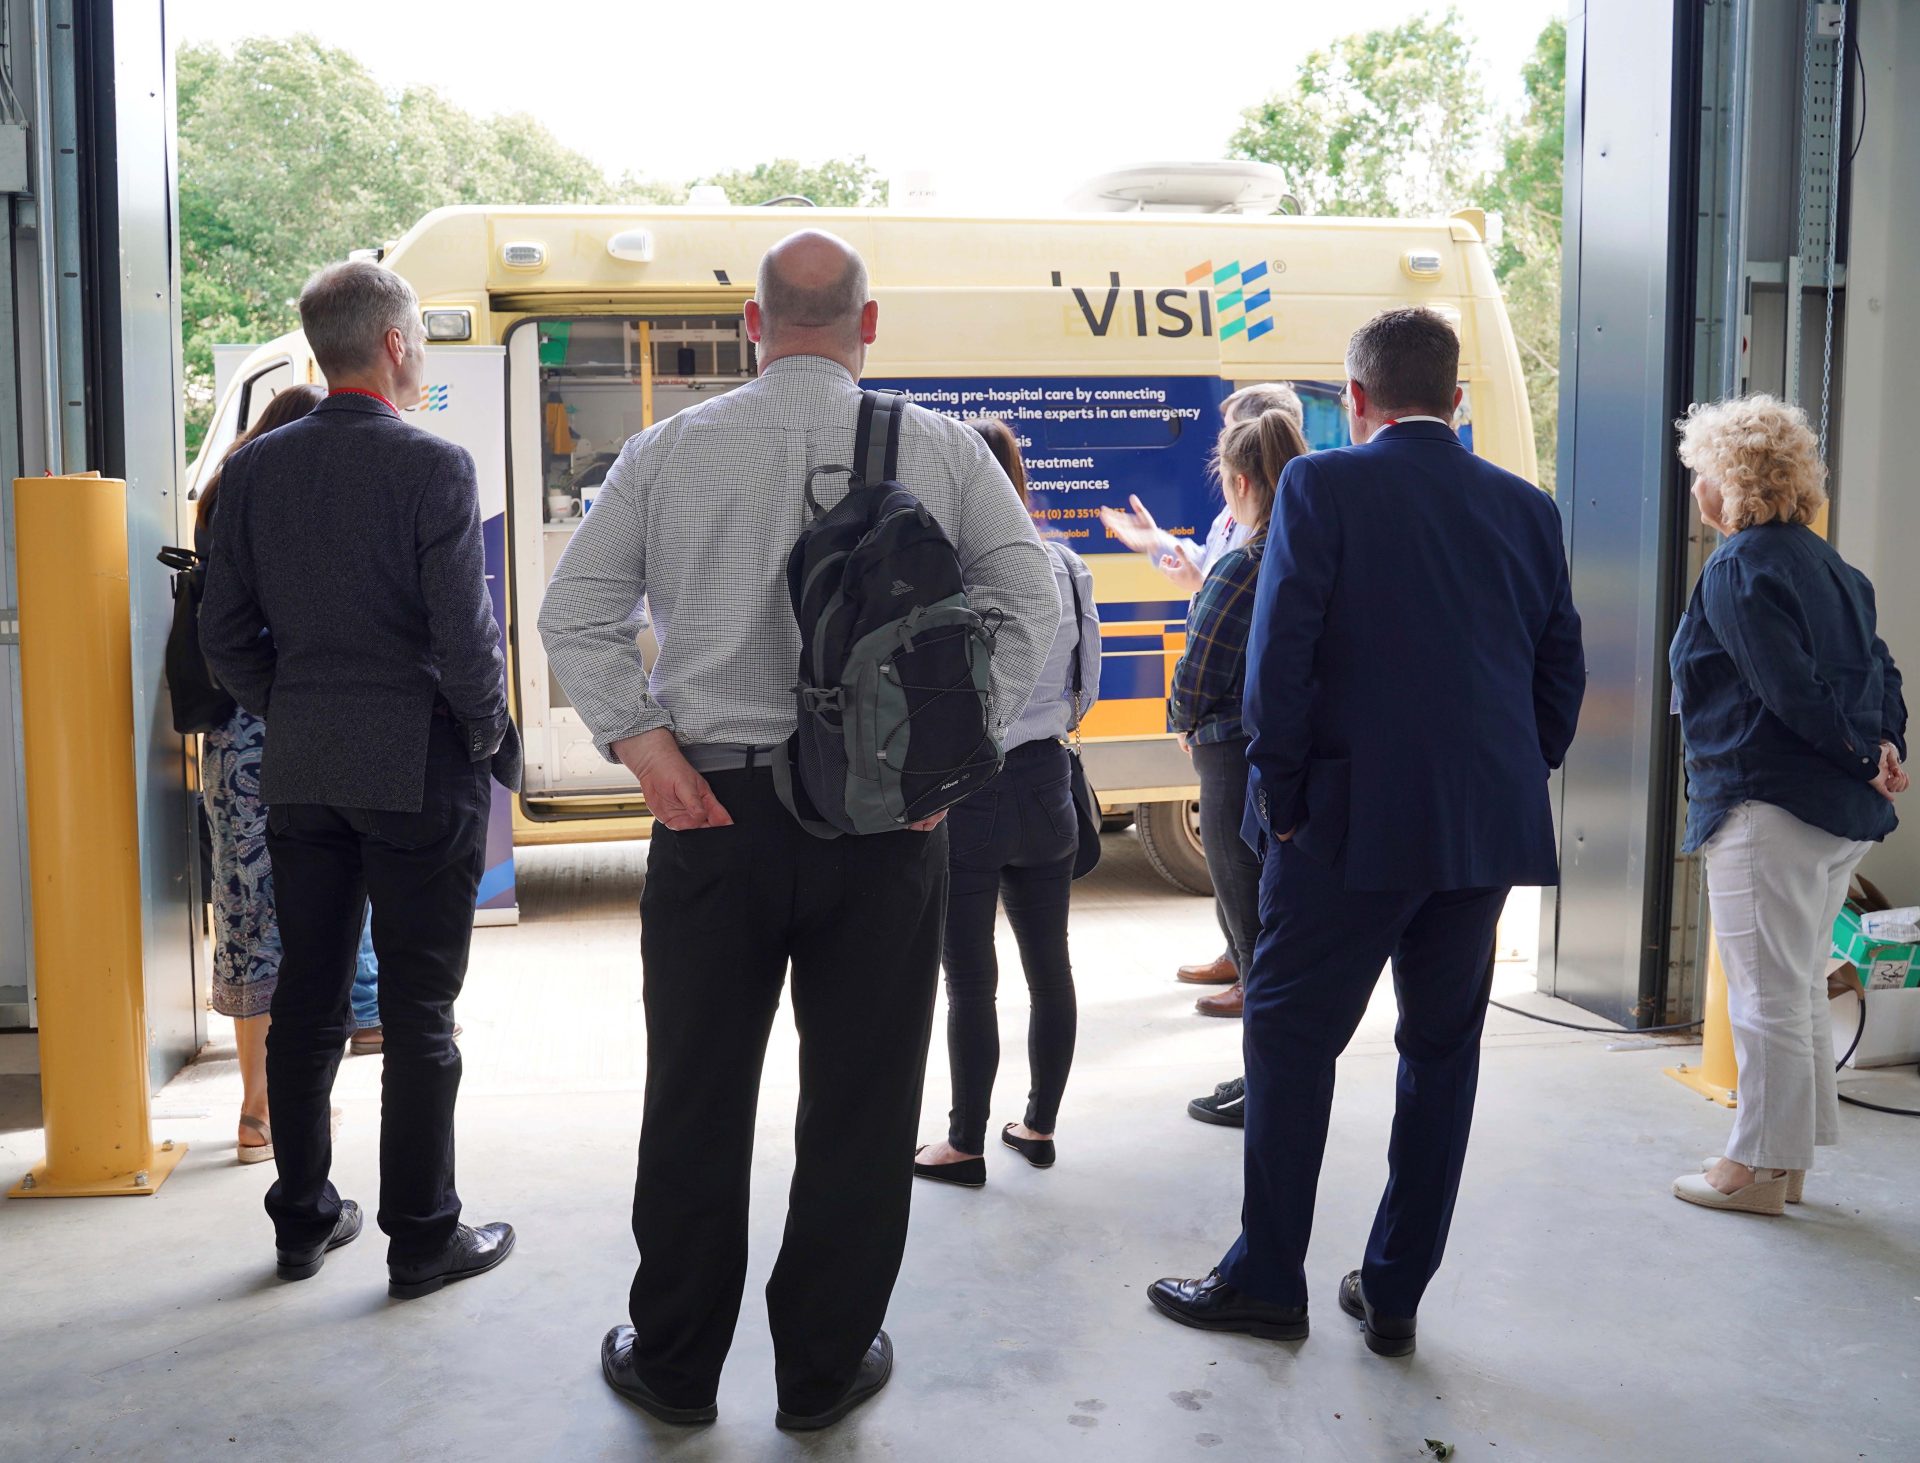 visionable-connected-ambulance-healthy-living-lab-event-westcott